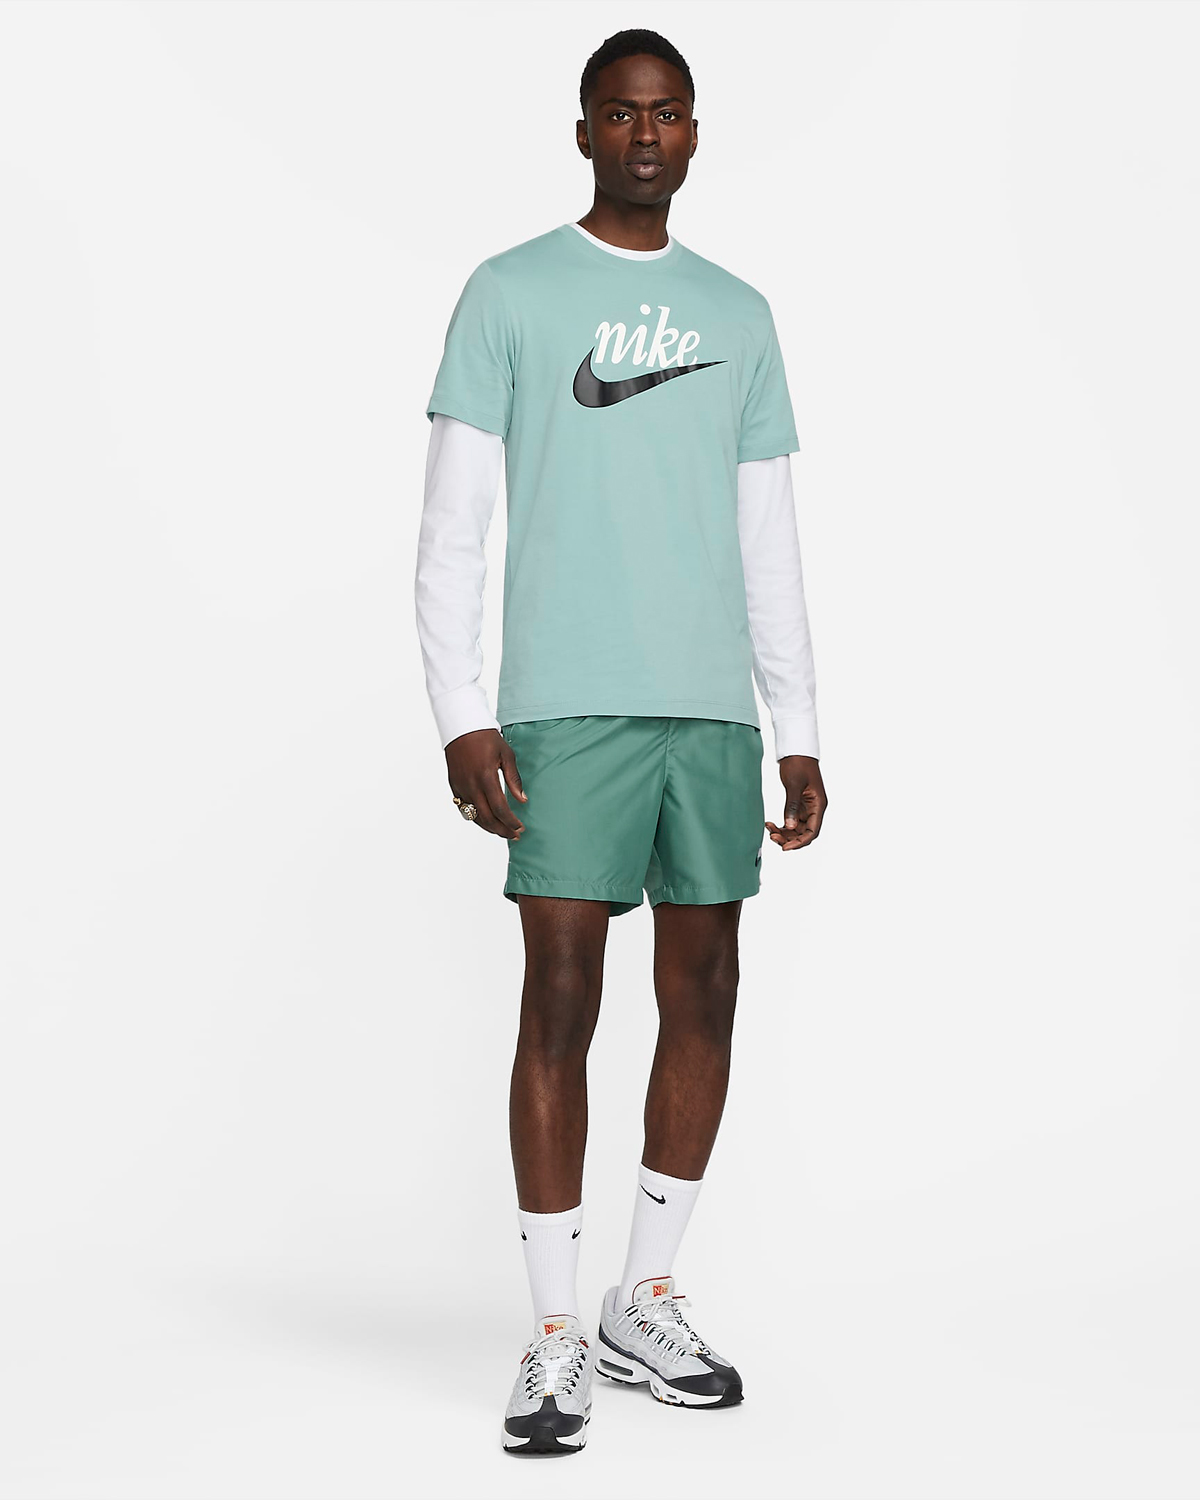 Nike-Sportswear-T-Shirt-Mineral-Outfit